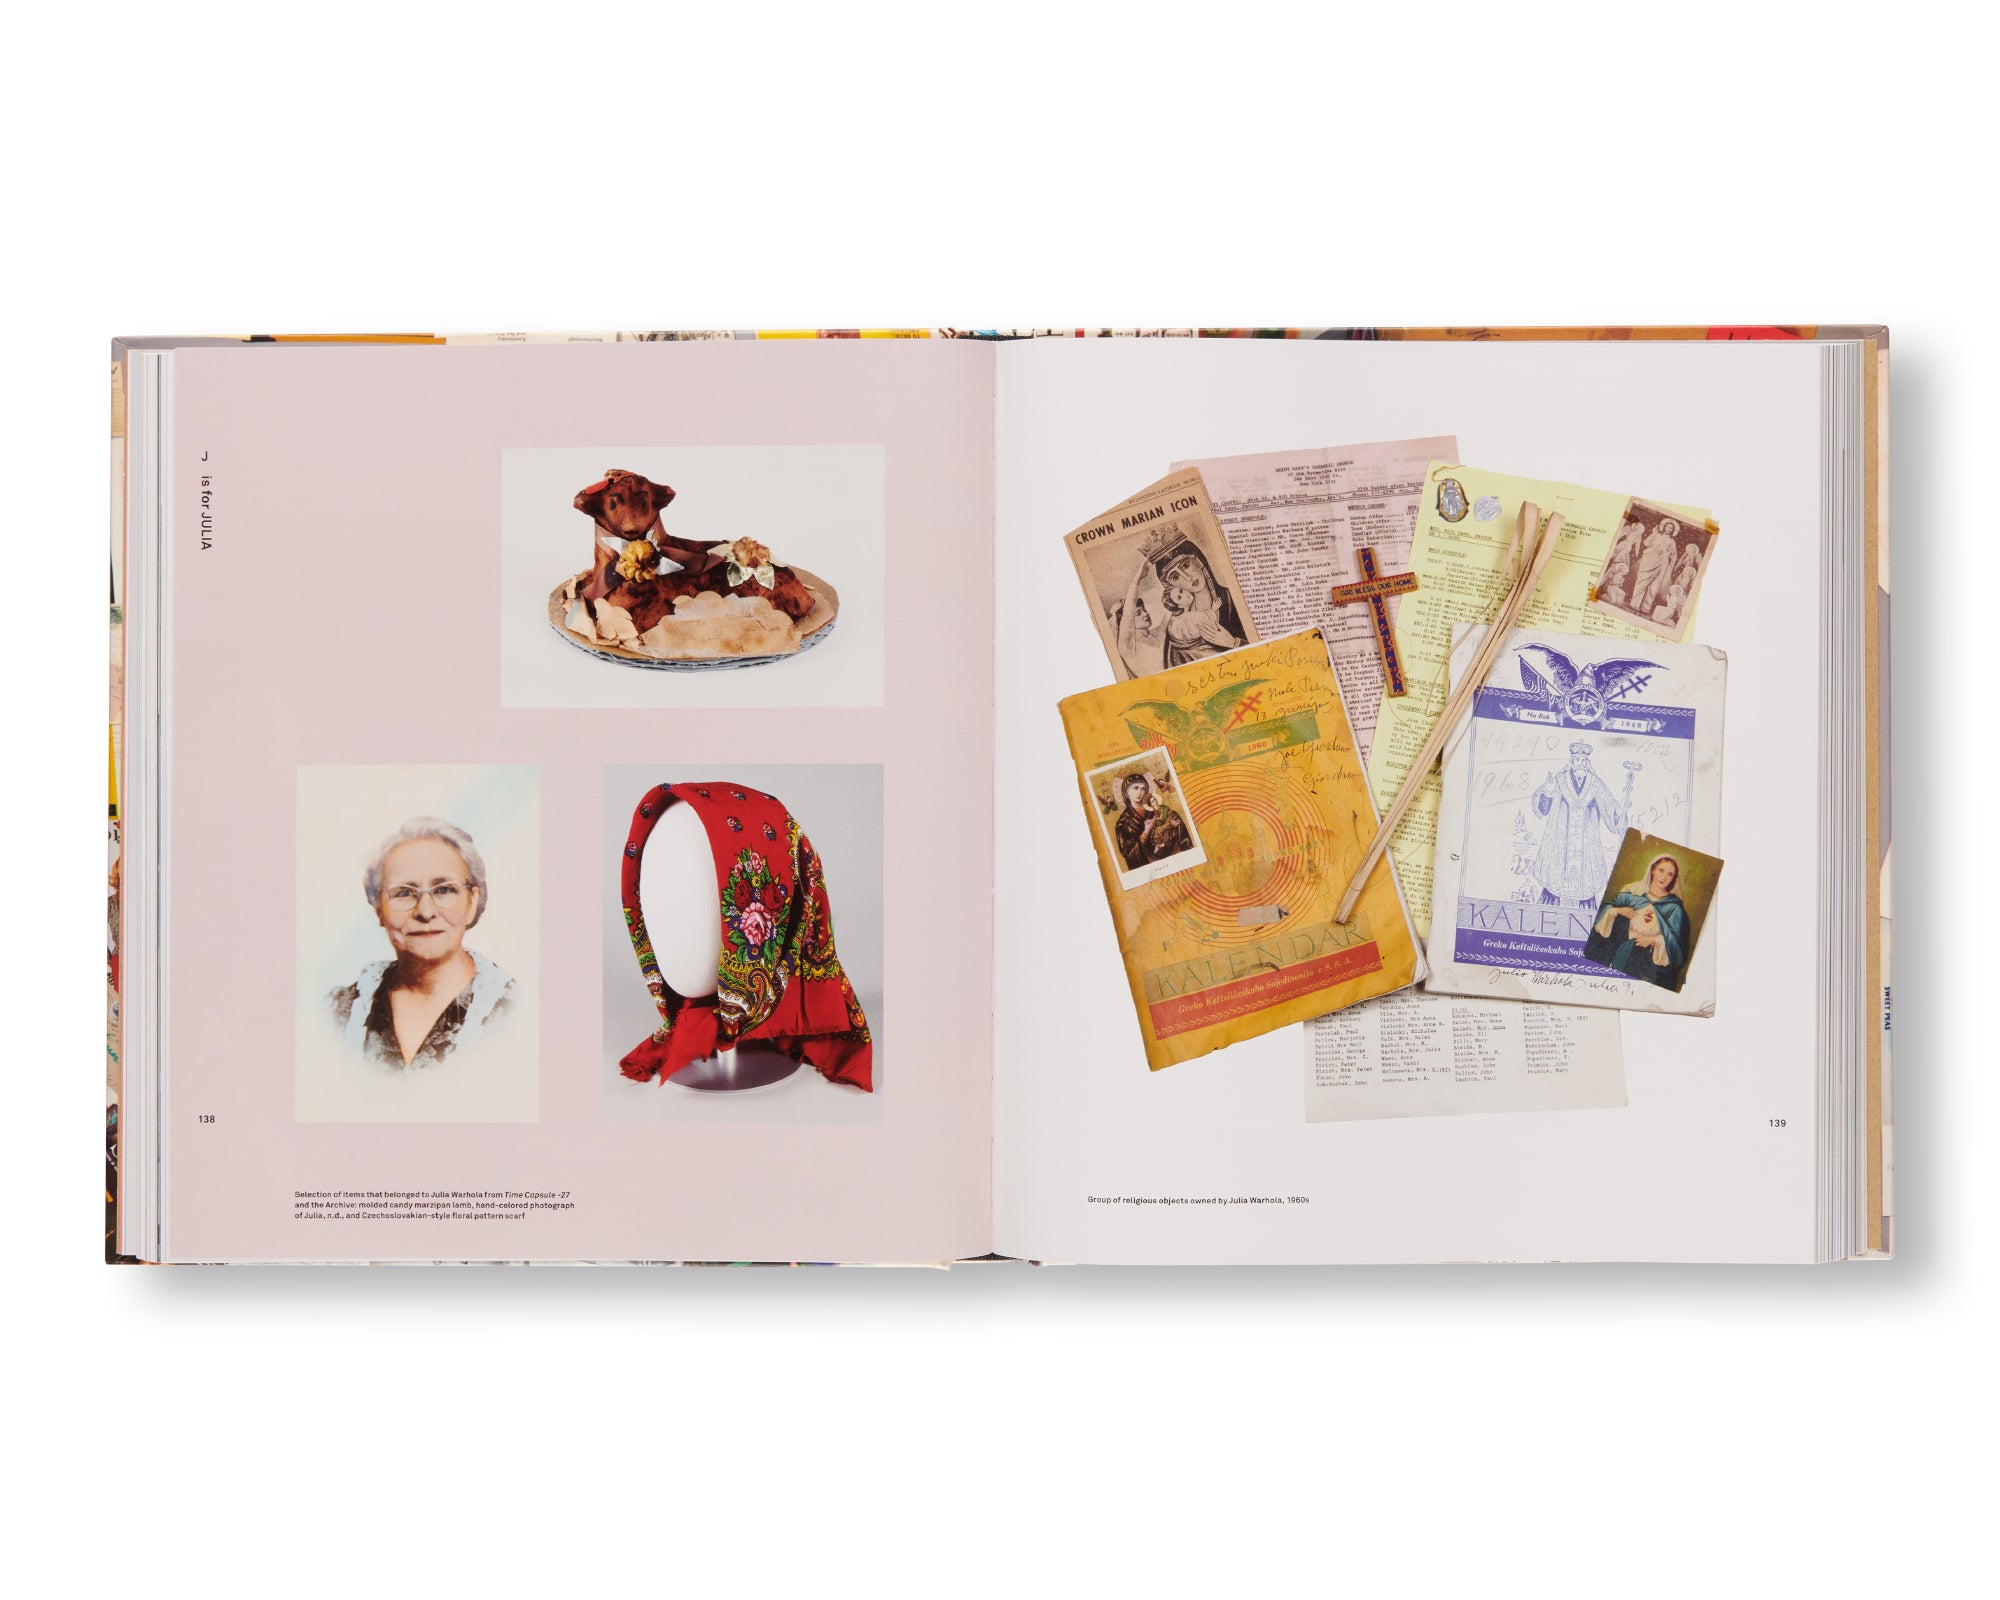 A IS FOR ARCHIVE - WARHOL'S WORLD FROM A TO Z by Andy Warhol